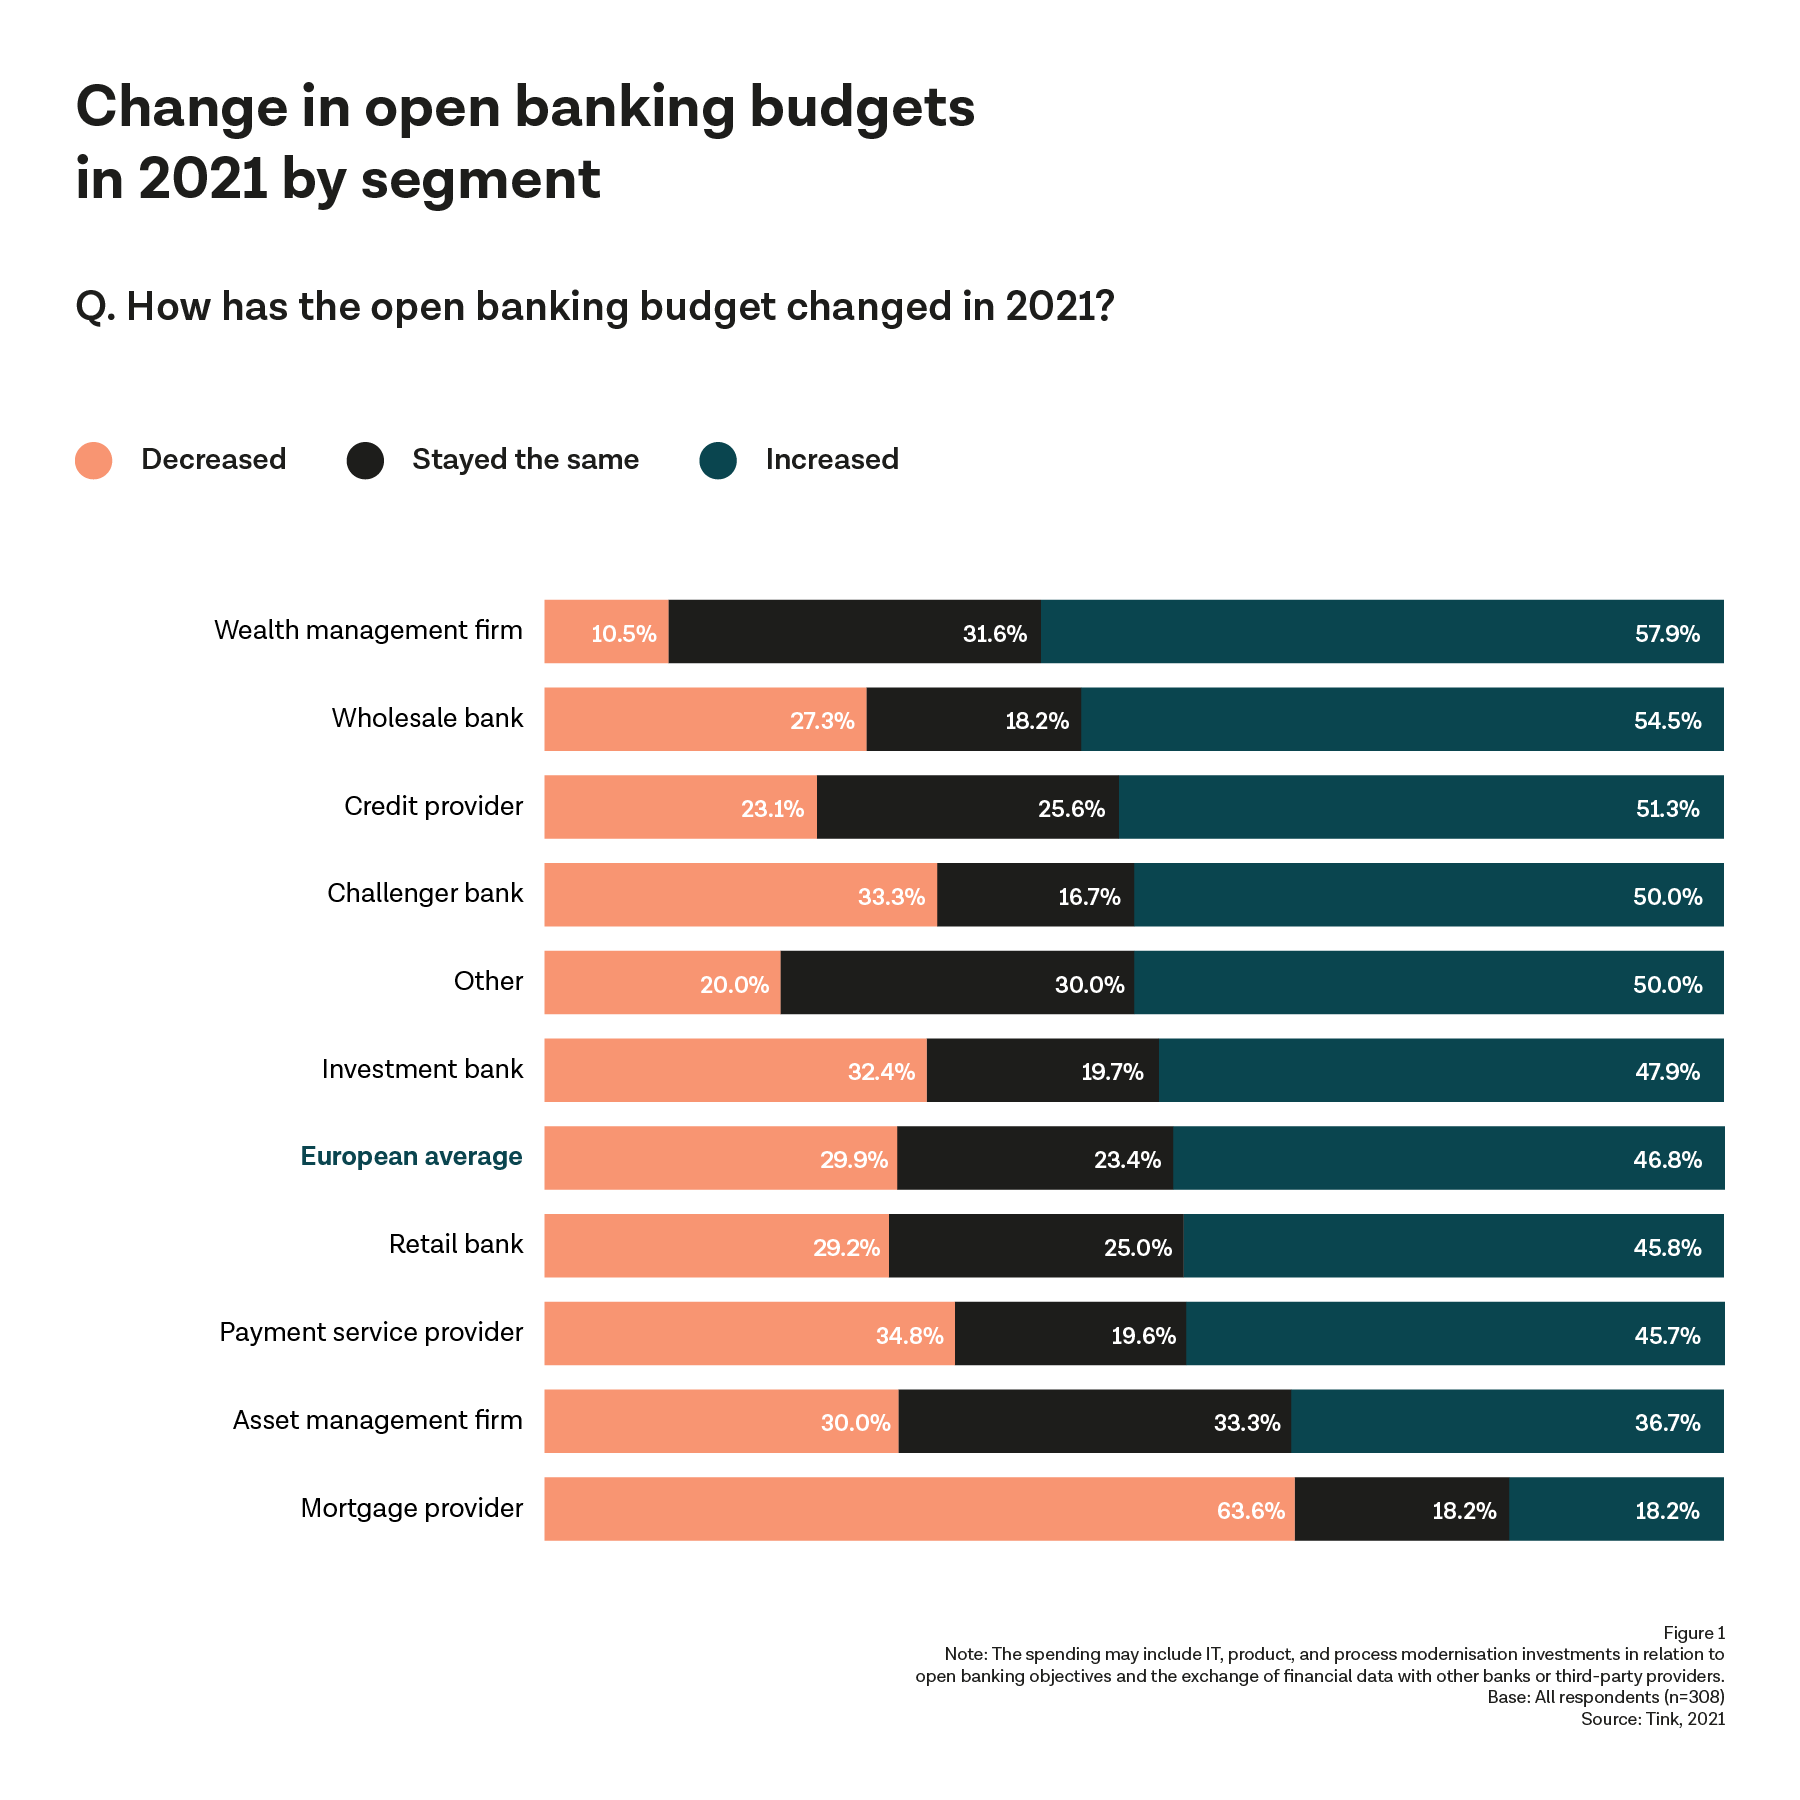 Open banking budgets — percentages illustrate how open banking budgets have changed in 2021 by segment.
